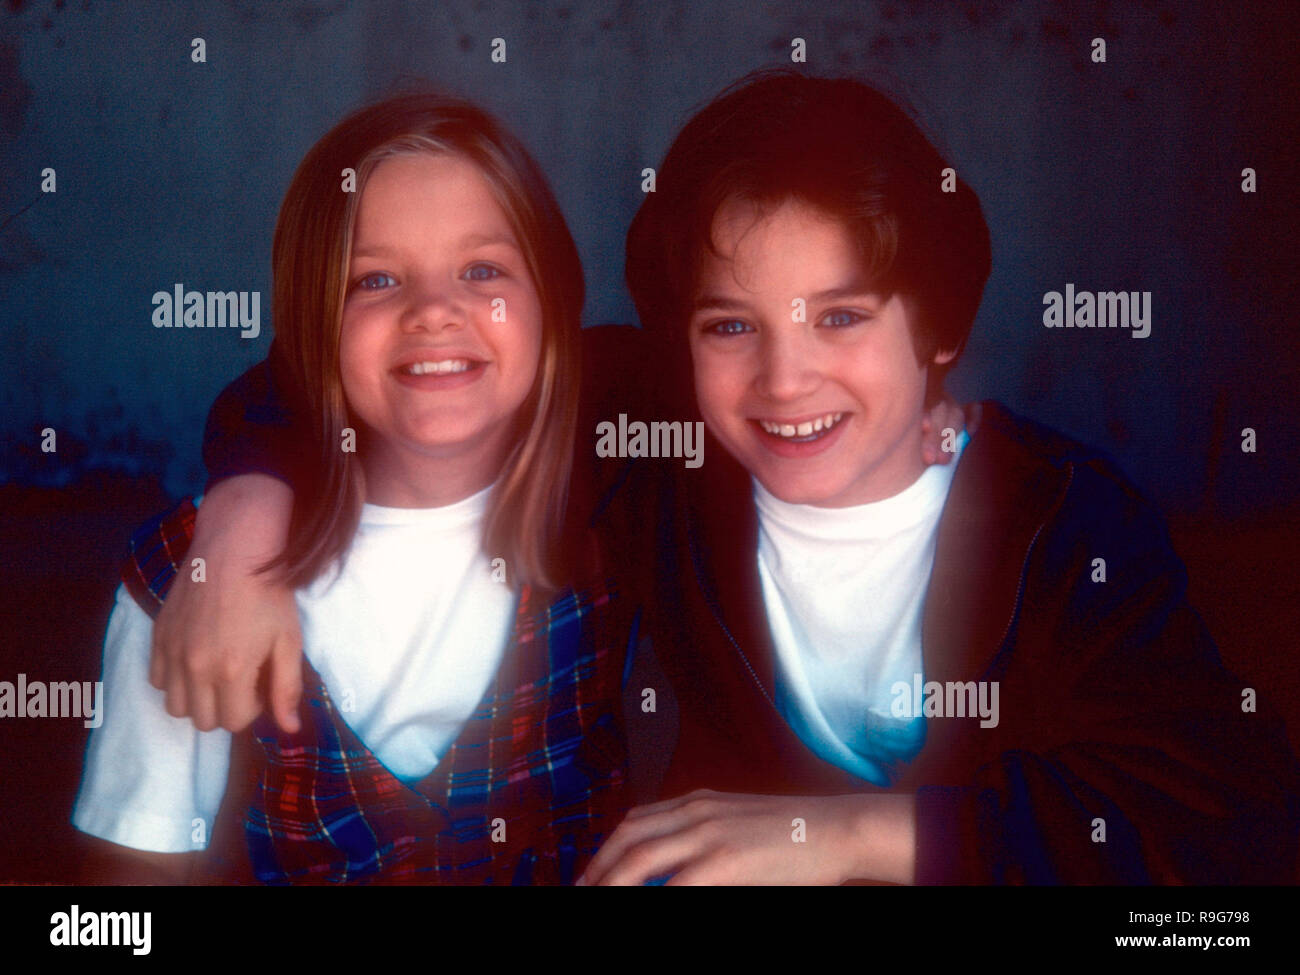 LOS ANGELES, CA -JUNE 6: (EXCLUSIVE) Actress Hannah Wood and brother actor Elijah Wood pose at a photo shoot on June 6, 1993 in Los Angeles, California. Photo by Barry King/Alamy Stock Photo Stock Photo